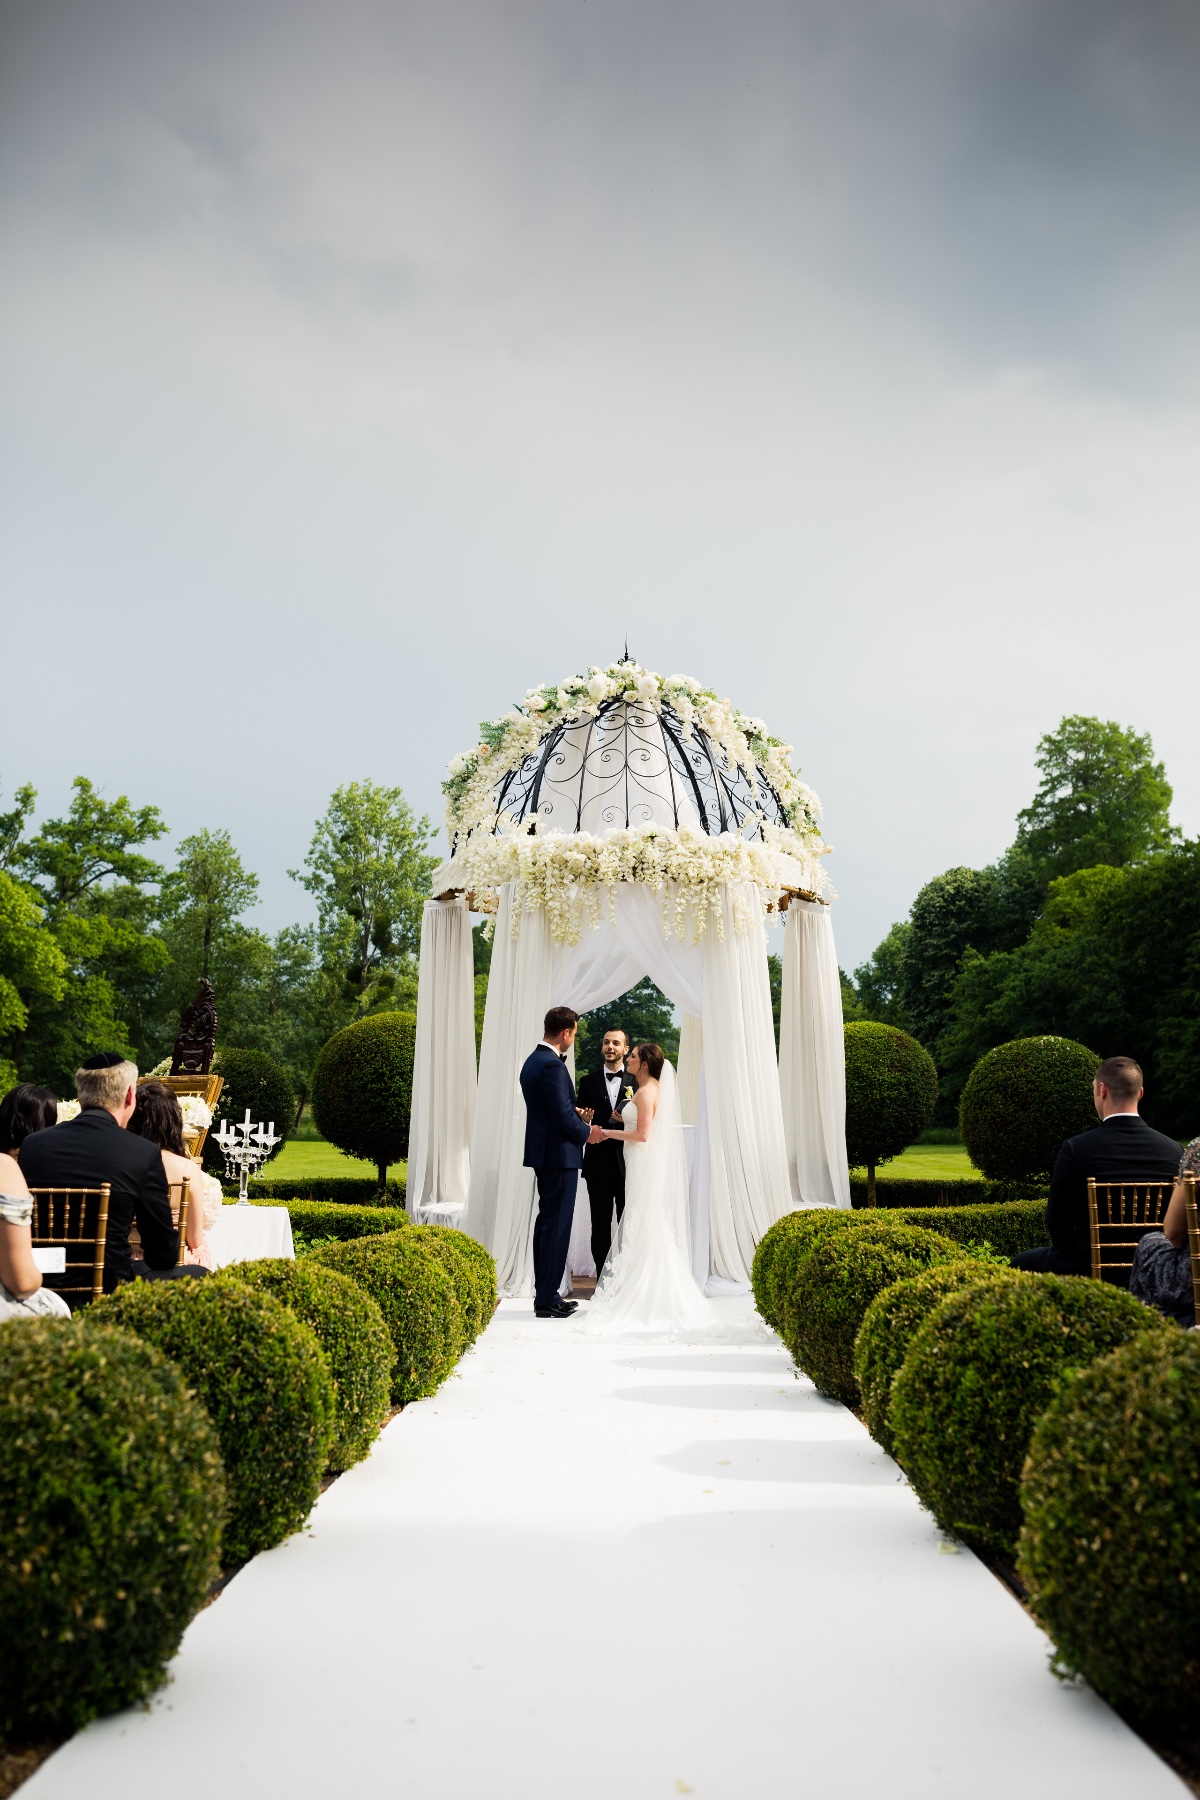 outdoor wedding ceremony in a manicured french garden